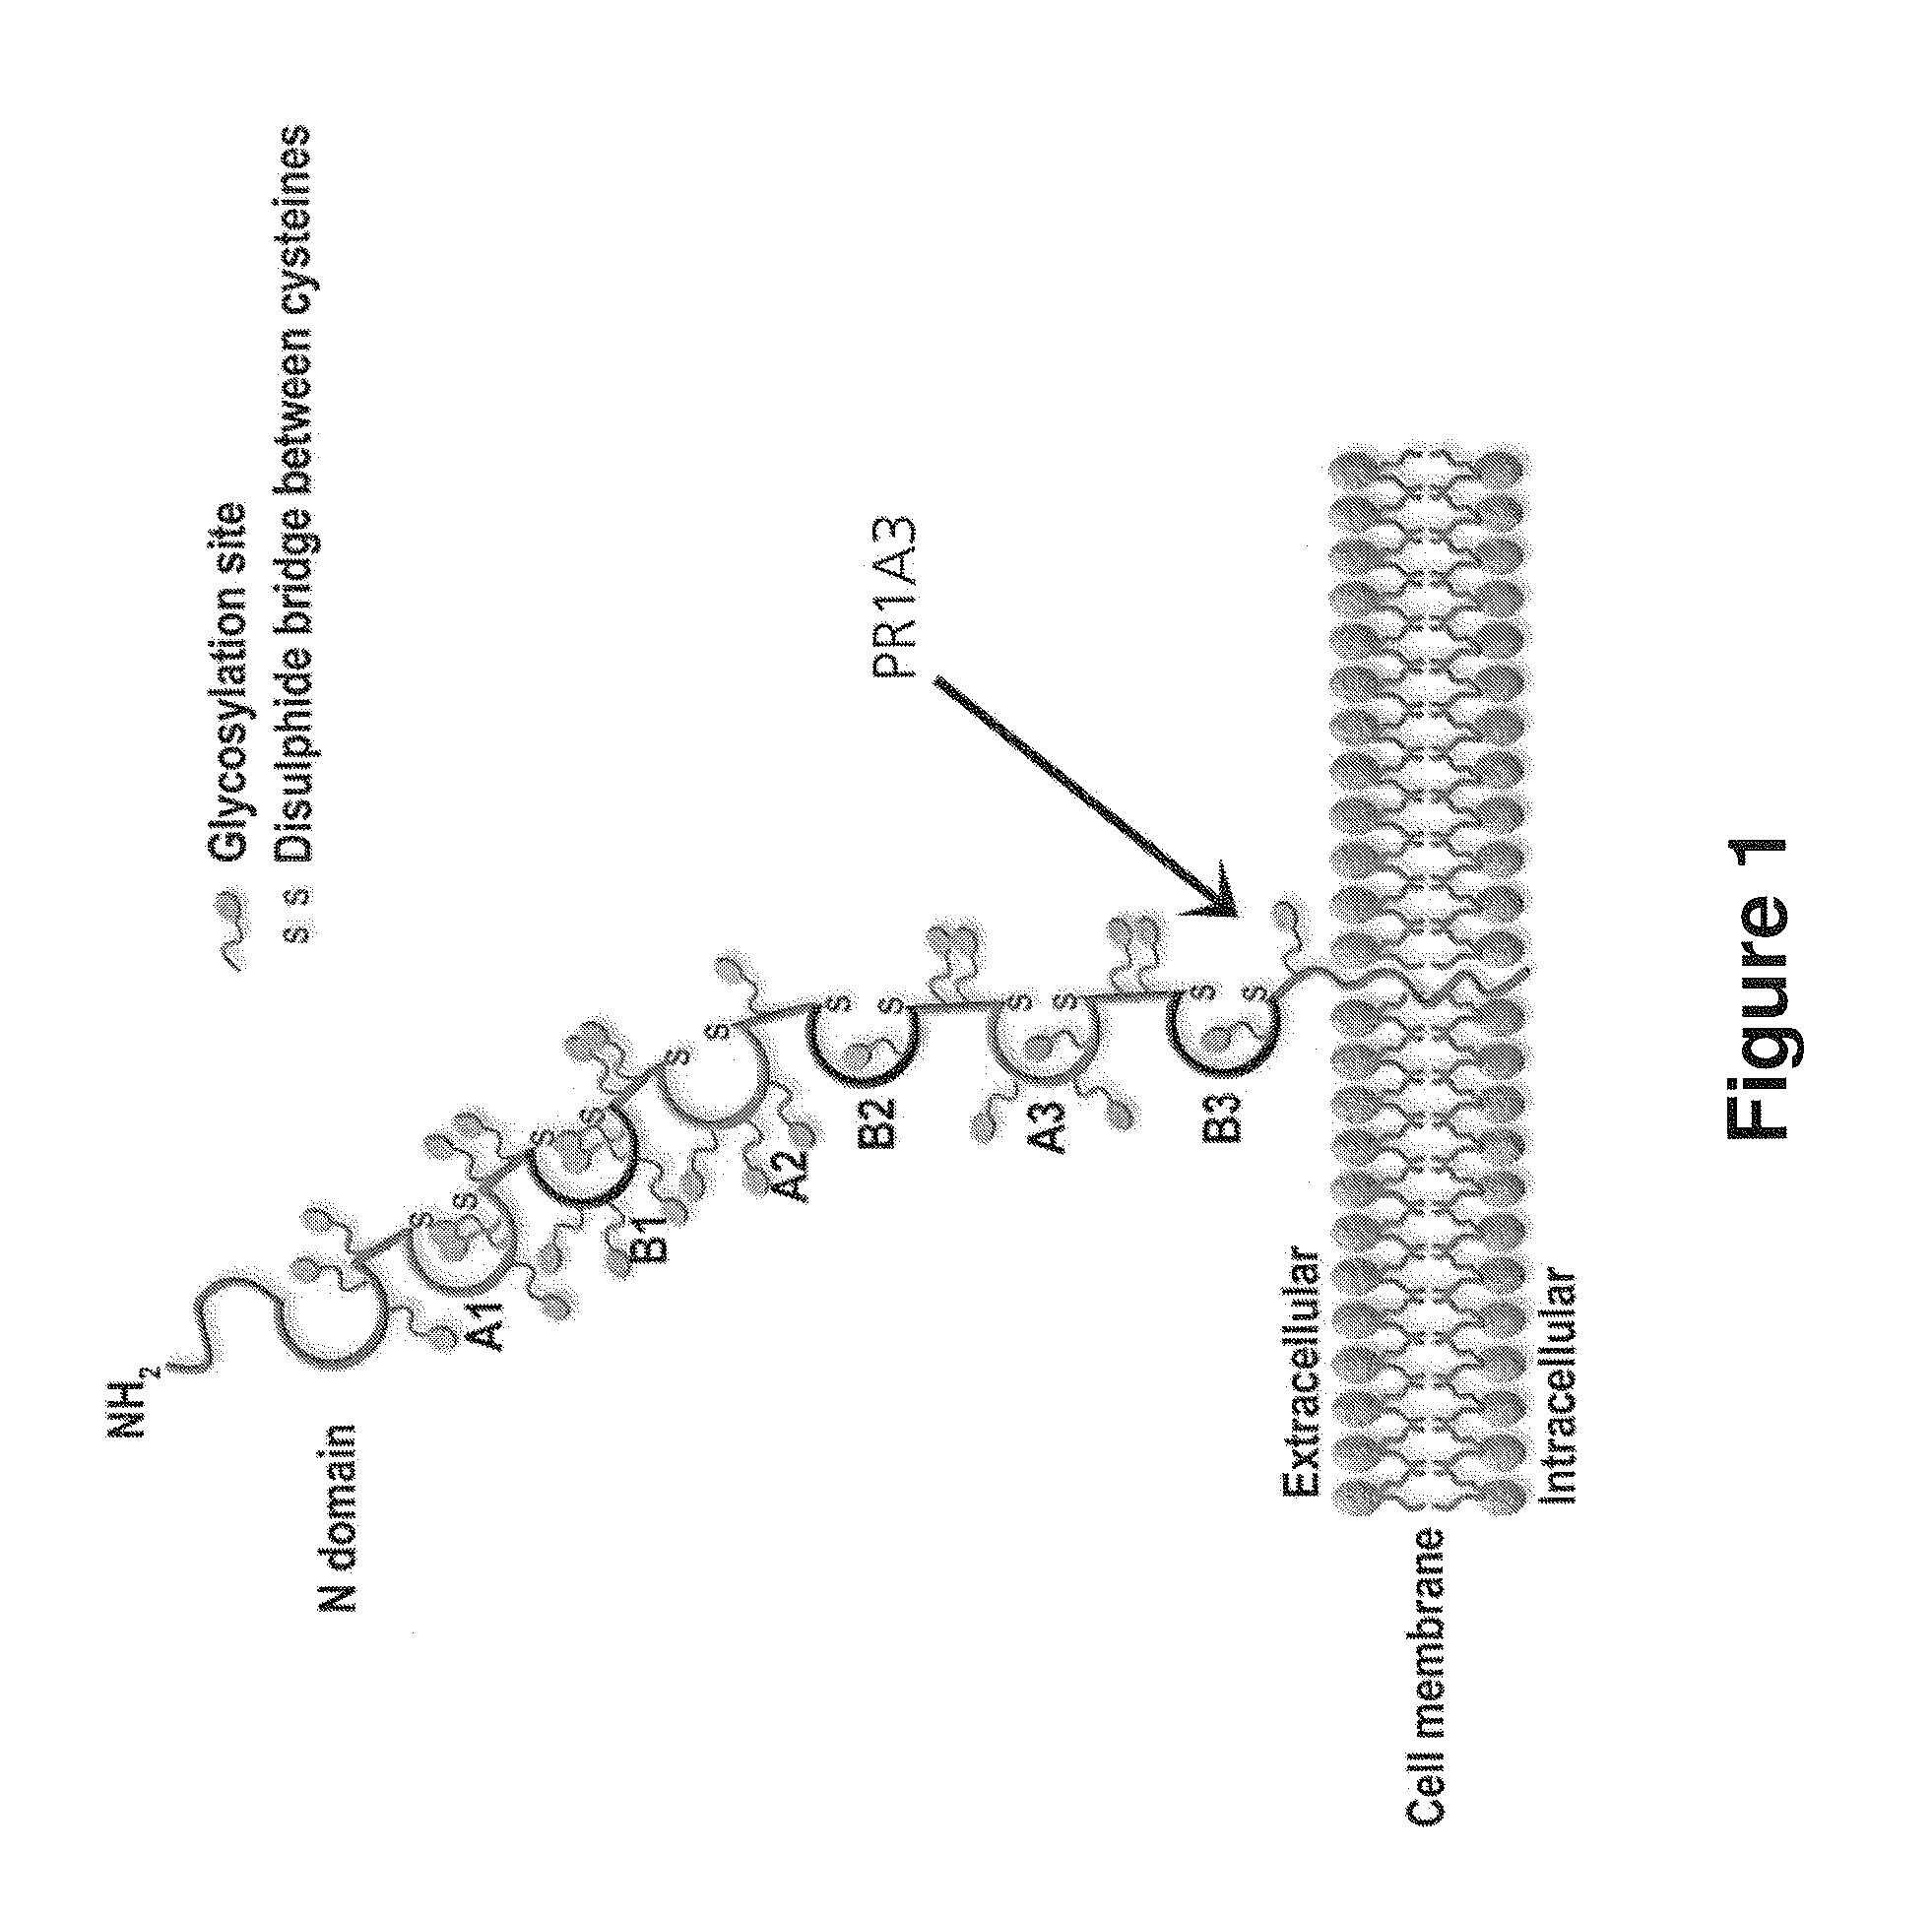 Antibodies to carcinoembryonic antigen (CEA), methods of making same, and uses thereof